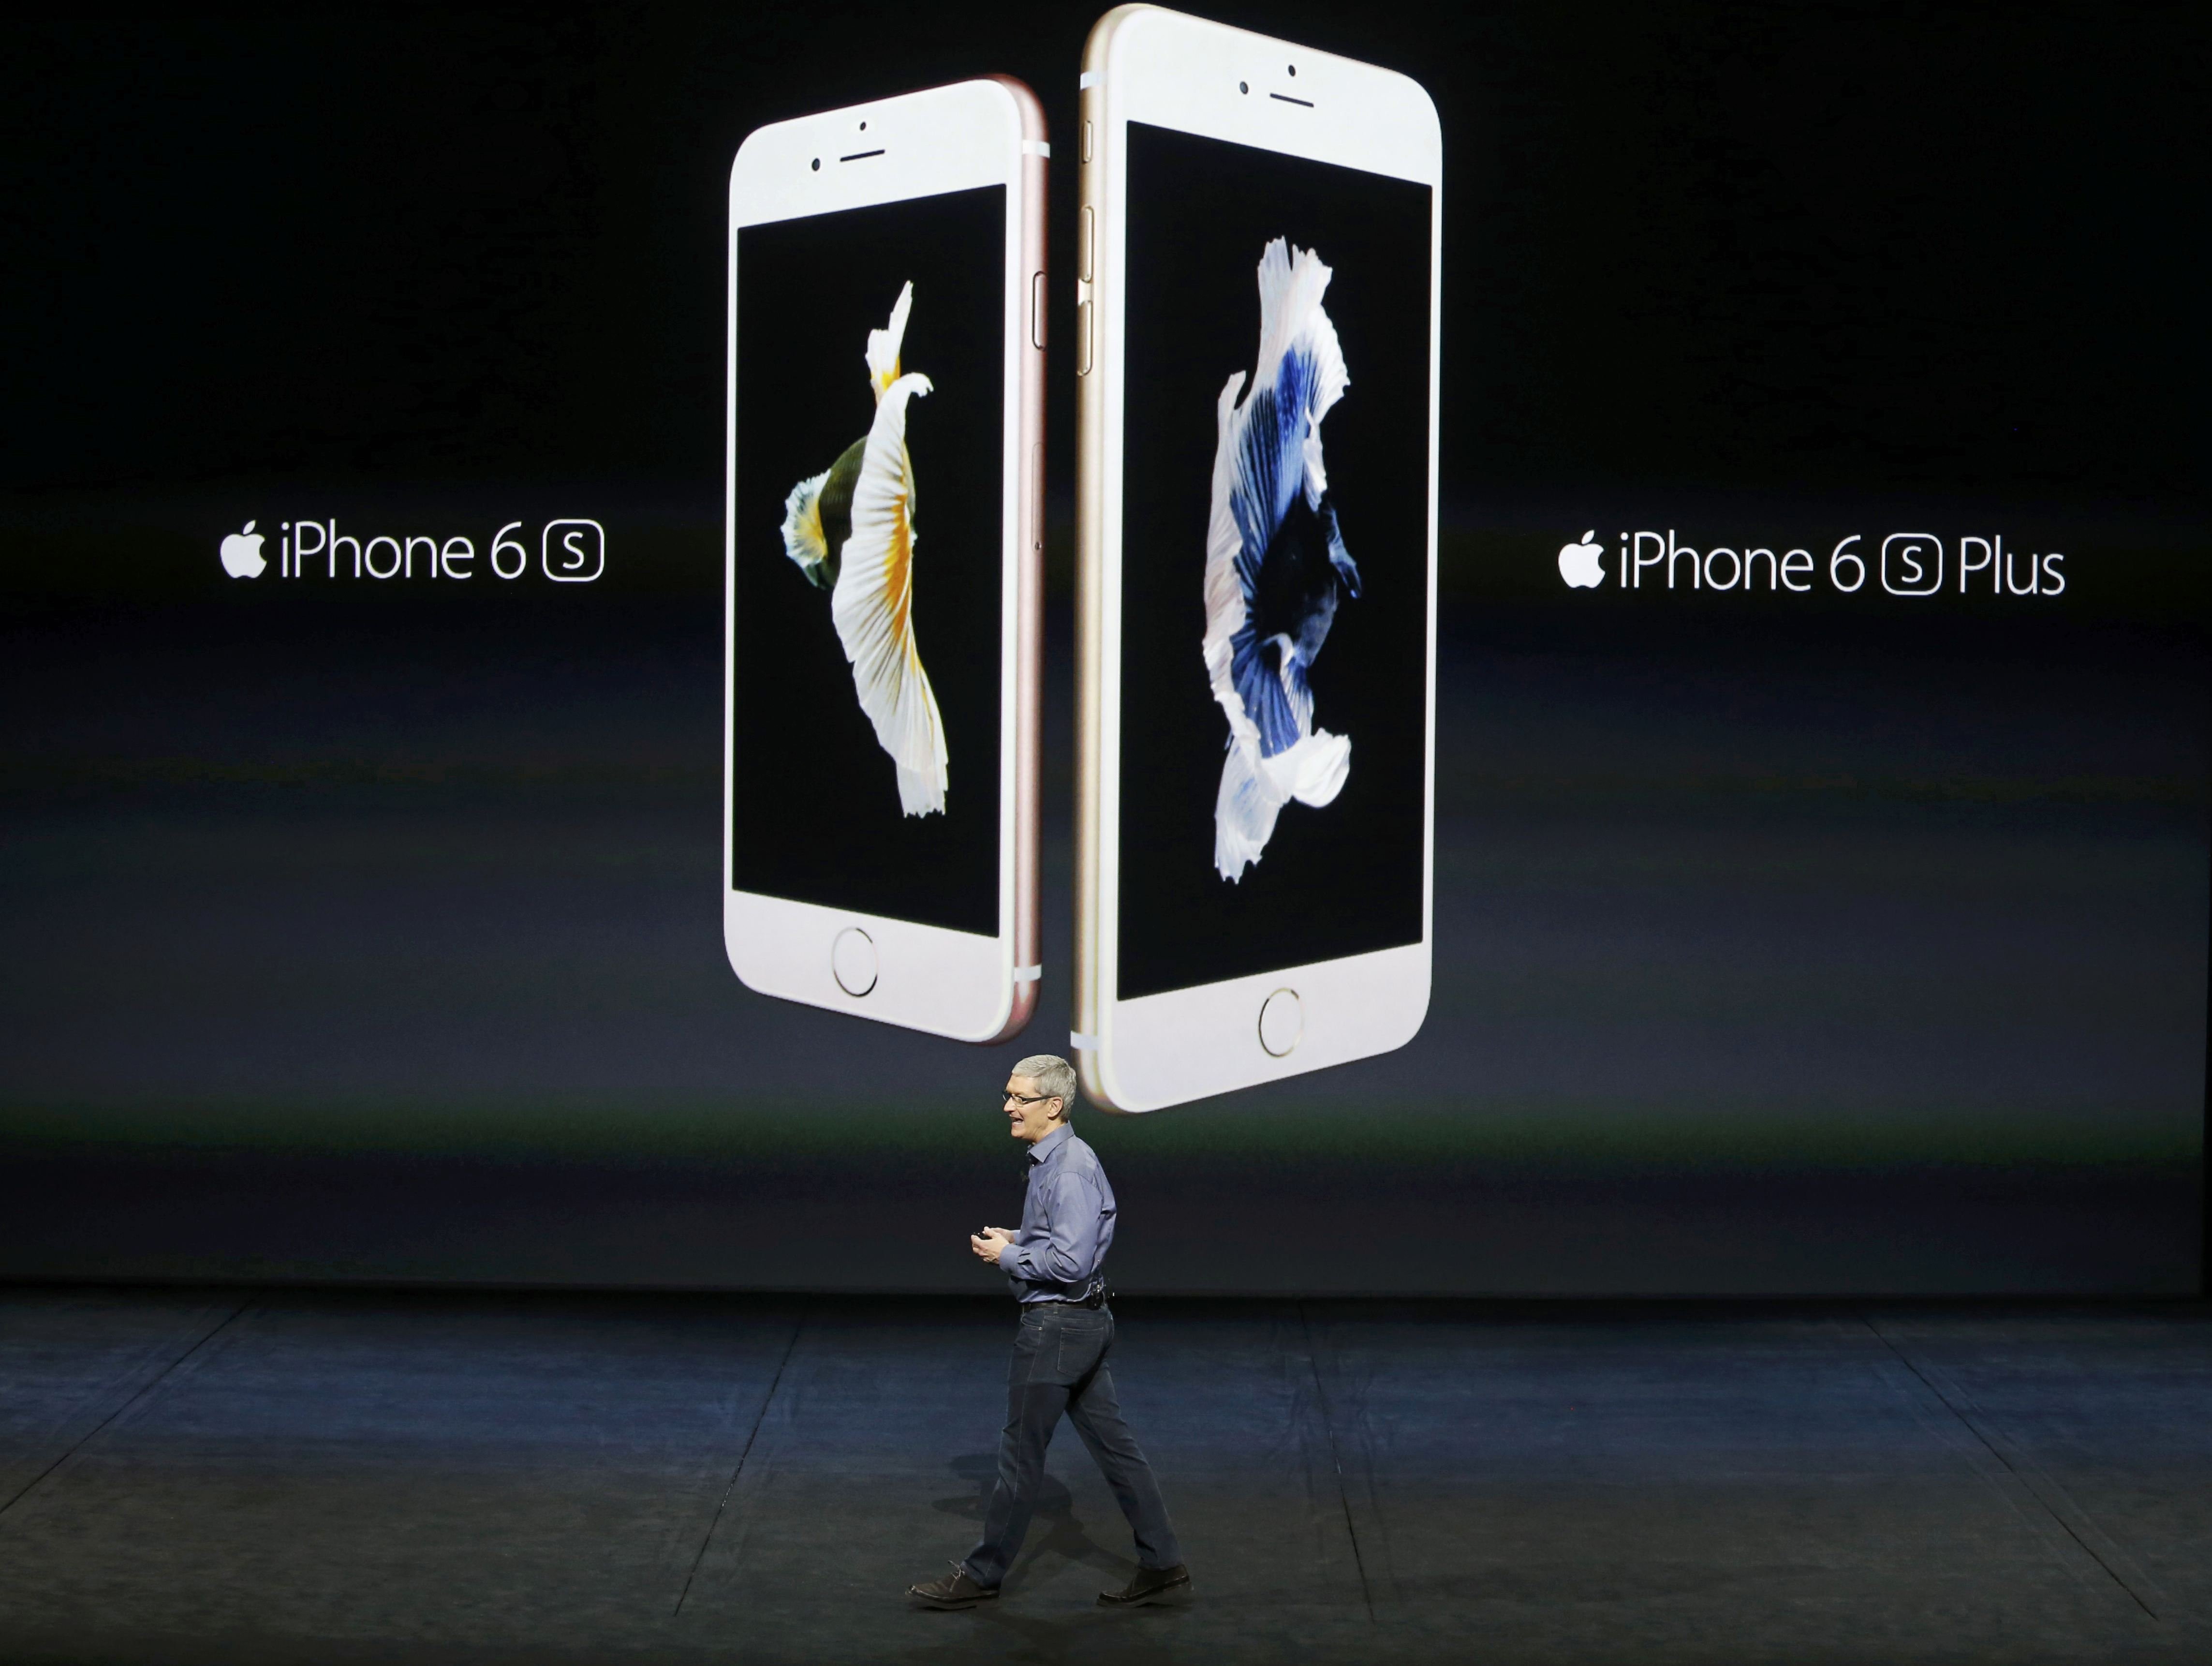 Apple CEO Tim Cook introduces the iPhone 6s and iPhone 6sPlus during an Apple media event in San Francisco, California